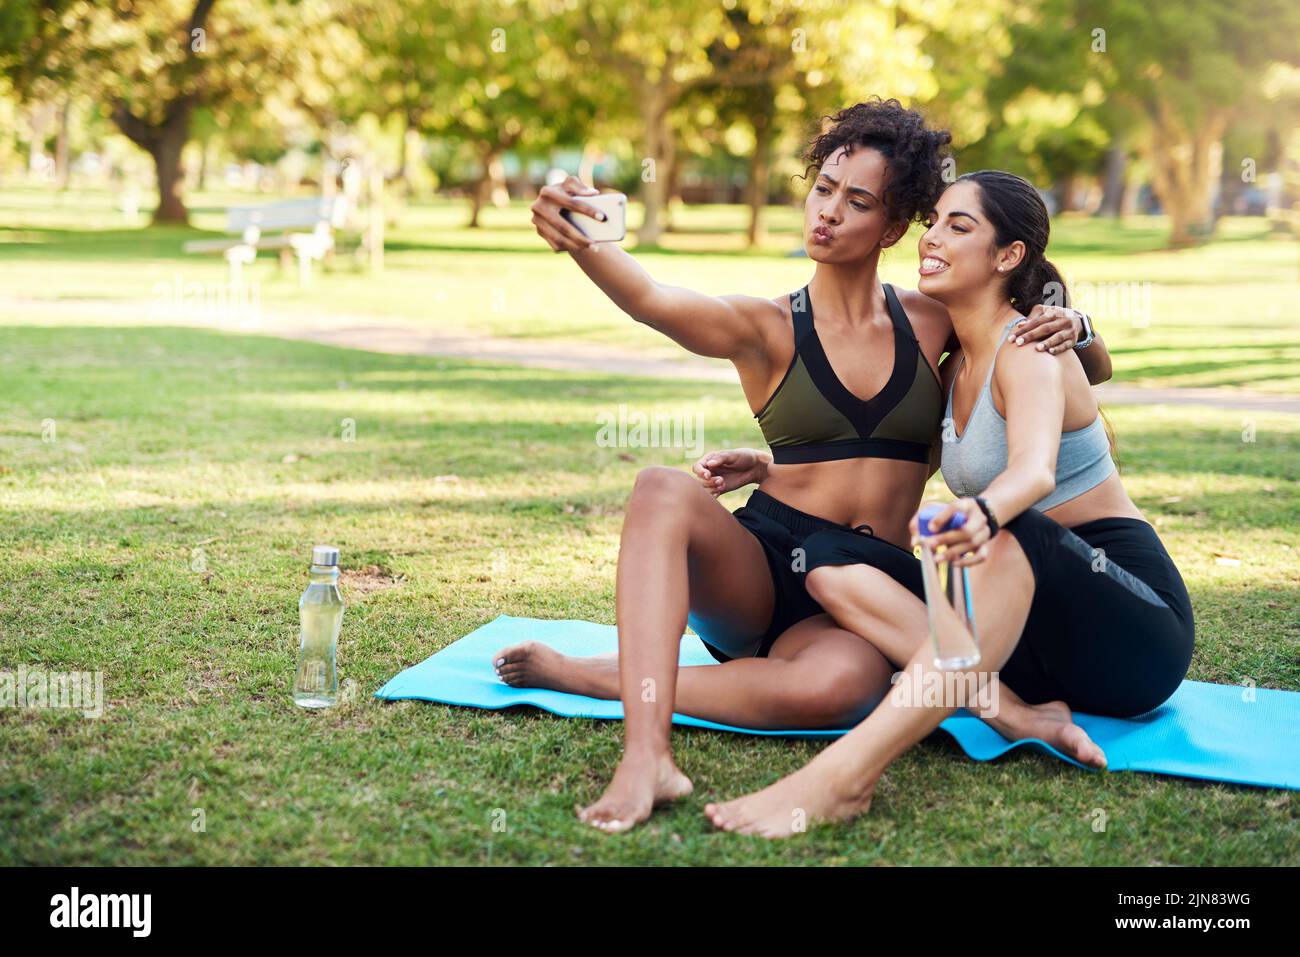 Duckface Do the duckface. Full length shot of two attractive young women posing for a selfie while in the park during the day. Stock Photo